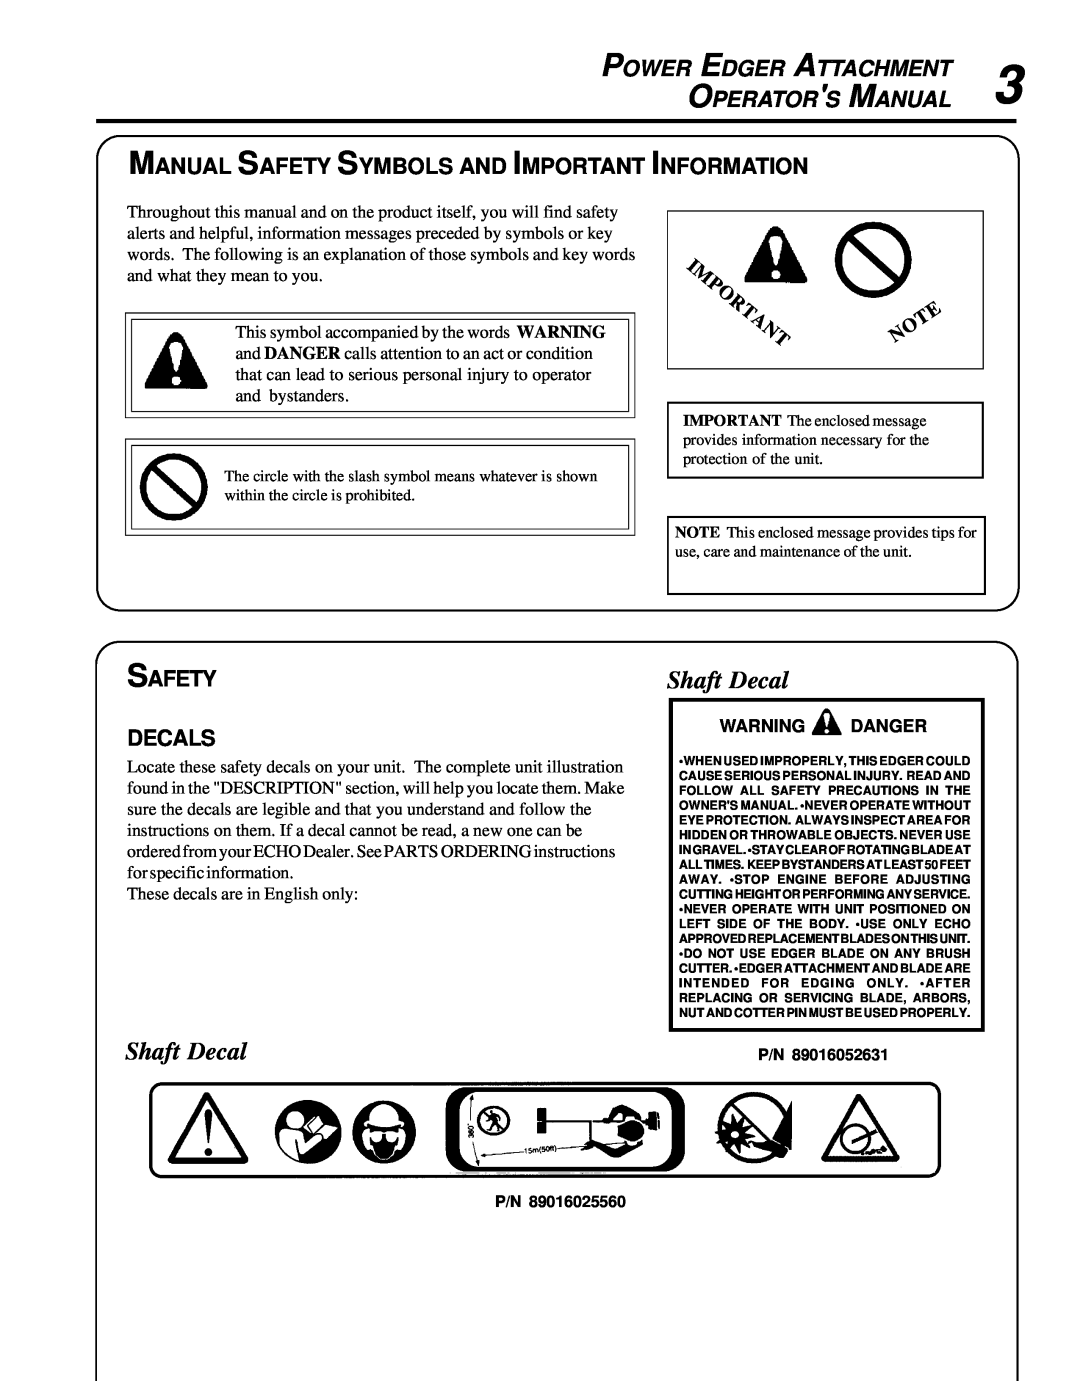 Echo 99944200470 manual Shaft Decal, Manual Safety Symbols And Important Information, Safety Decals, Power Edger Attachment 